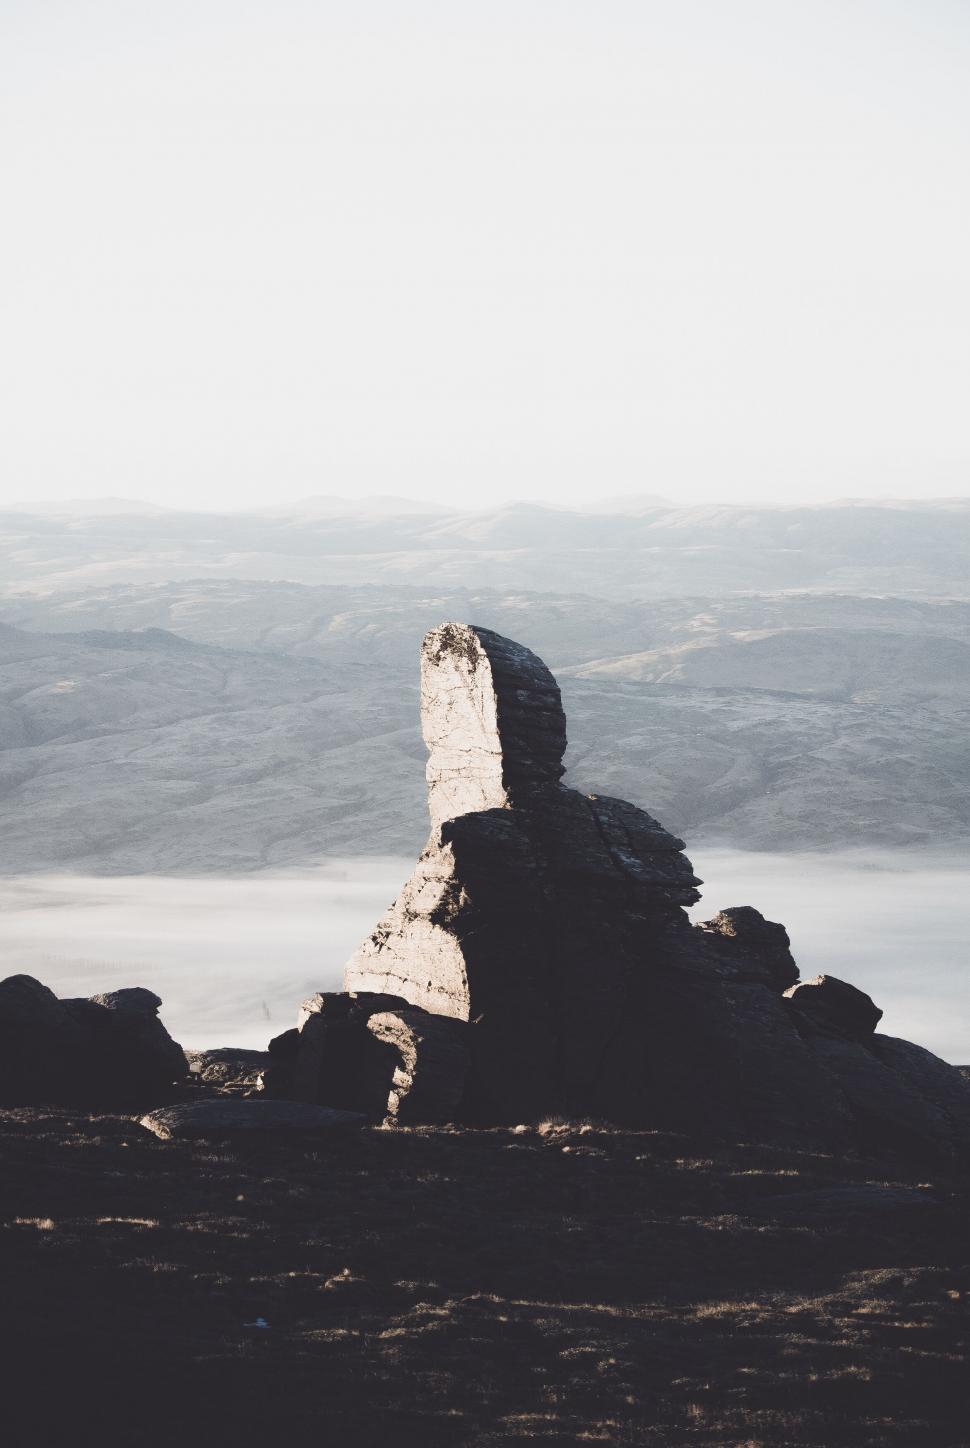 Free Image of A rock formation on a mountain 